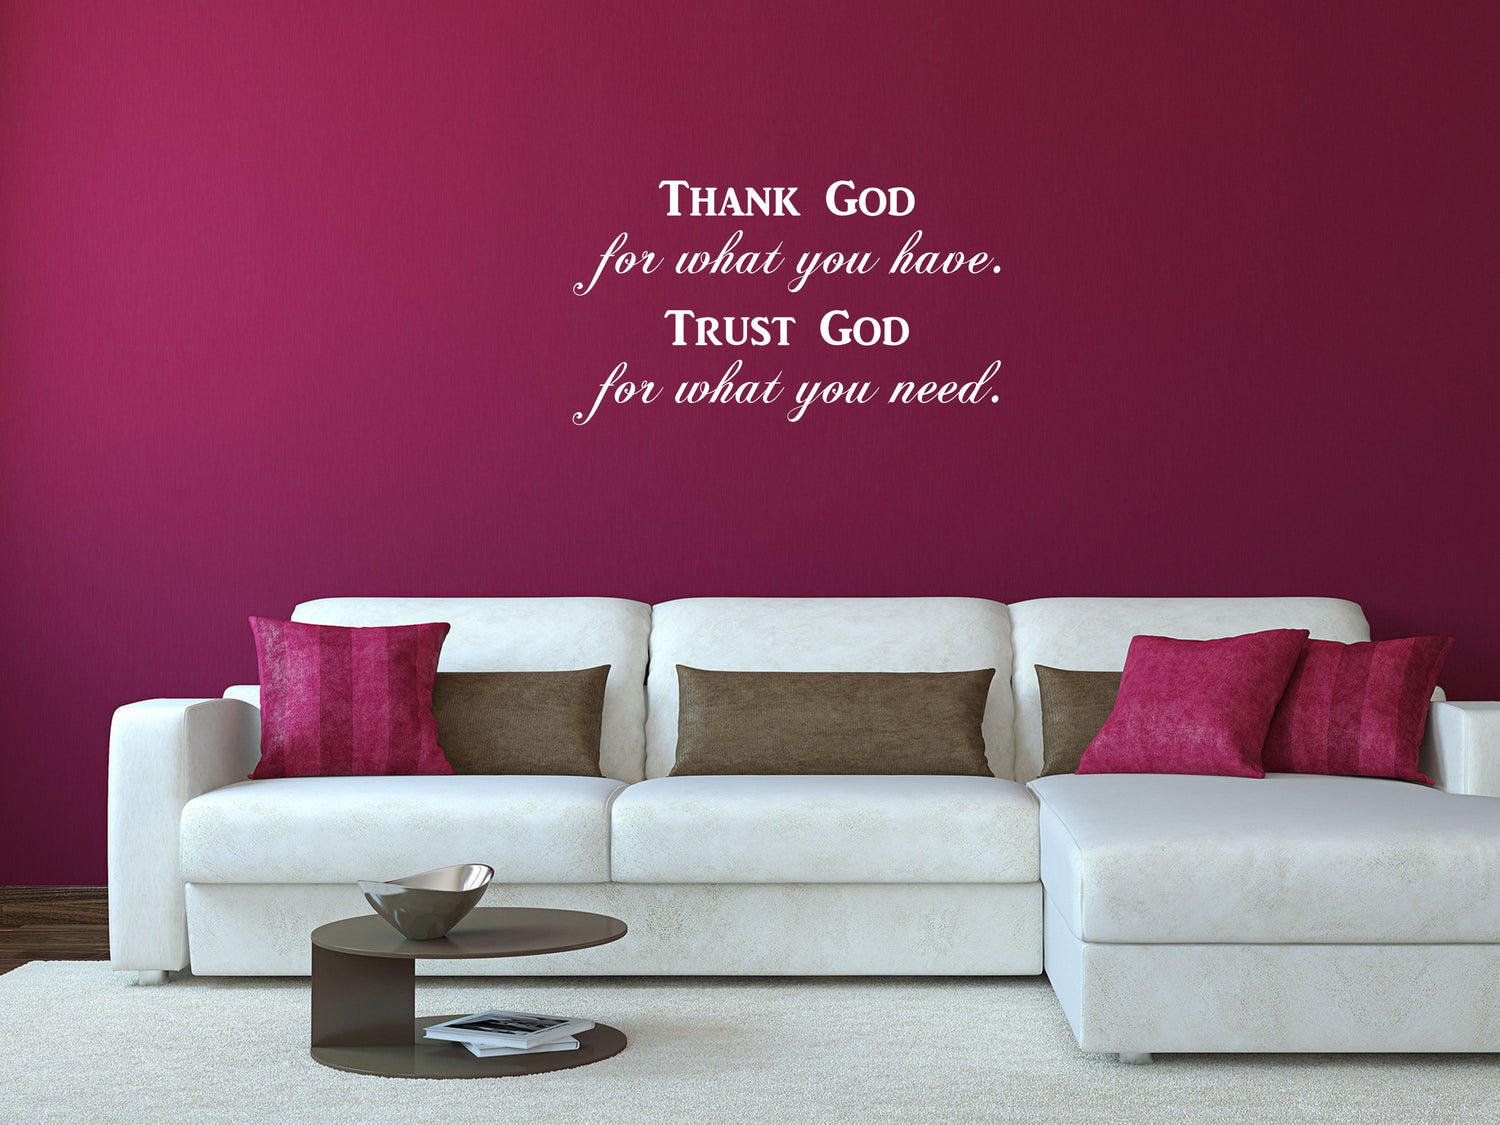 Thank God For What You Have - Inspirational Wall Signs Vinyl Wall Decal Inspirational Wall Signs 